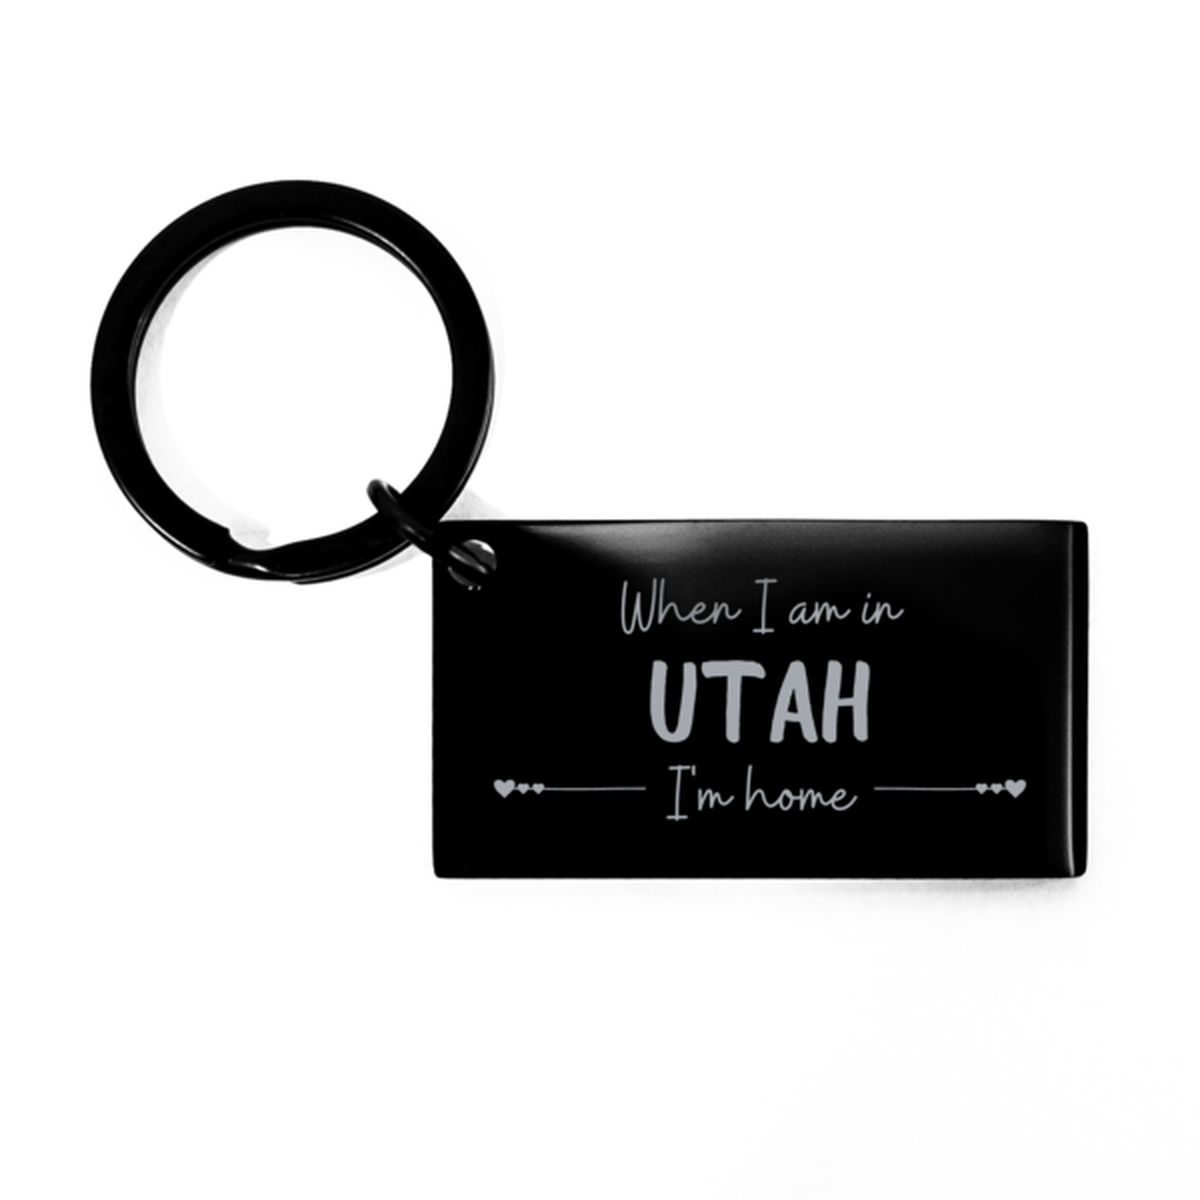 When I am in Utah I'm home Keychain, Cheap Gifts For Utah, State Utah Birthday Gifts for Friends Coworker